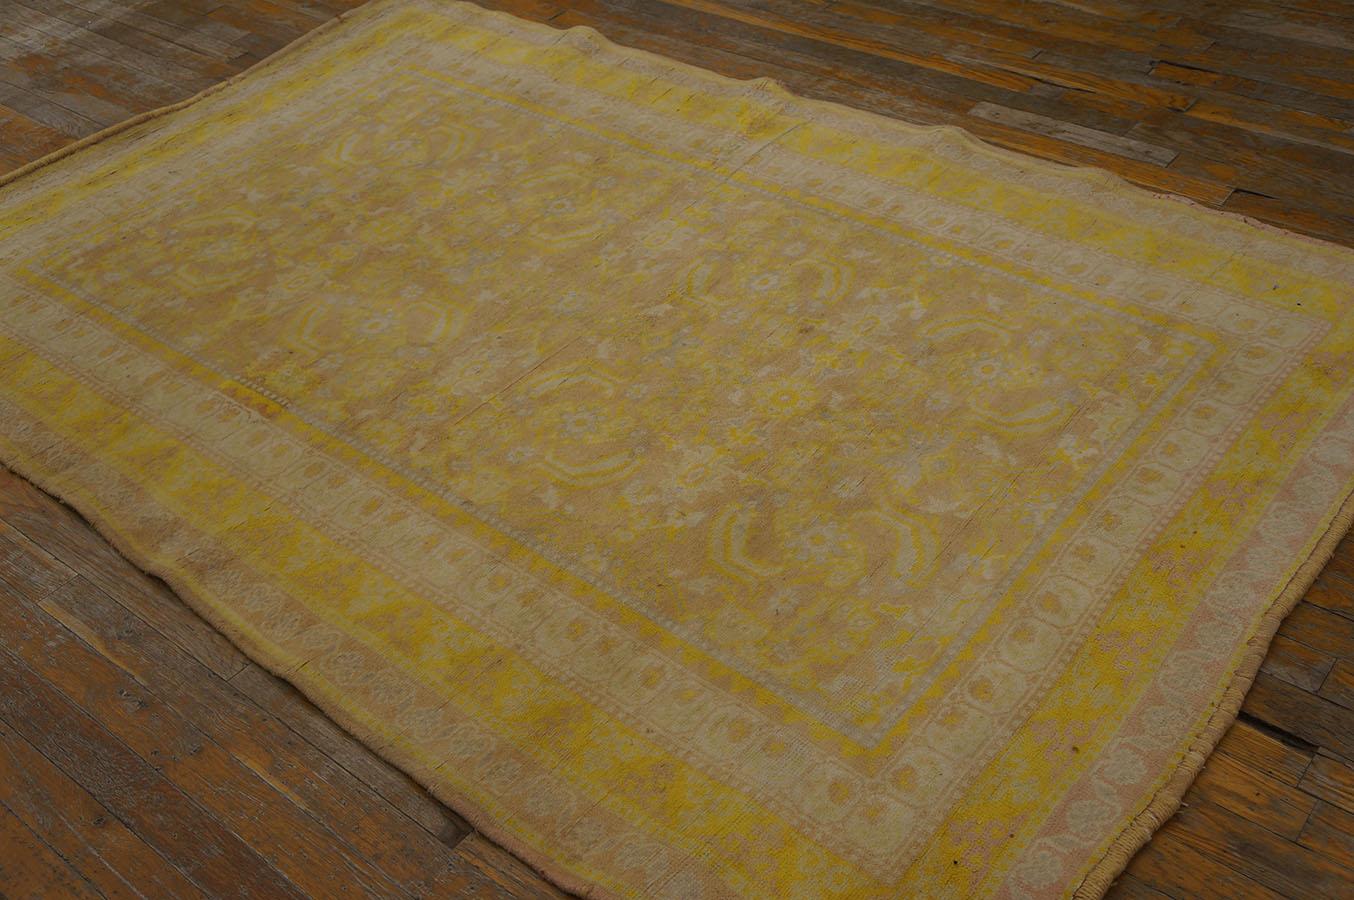 Hand-Knotted Early 20th Century Indian Cotton Agra Carpet ( 4'7